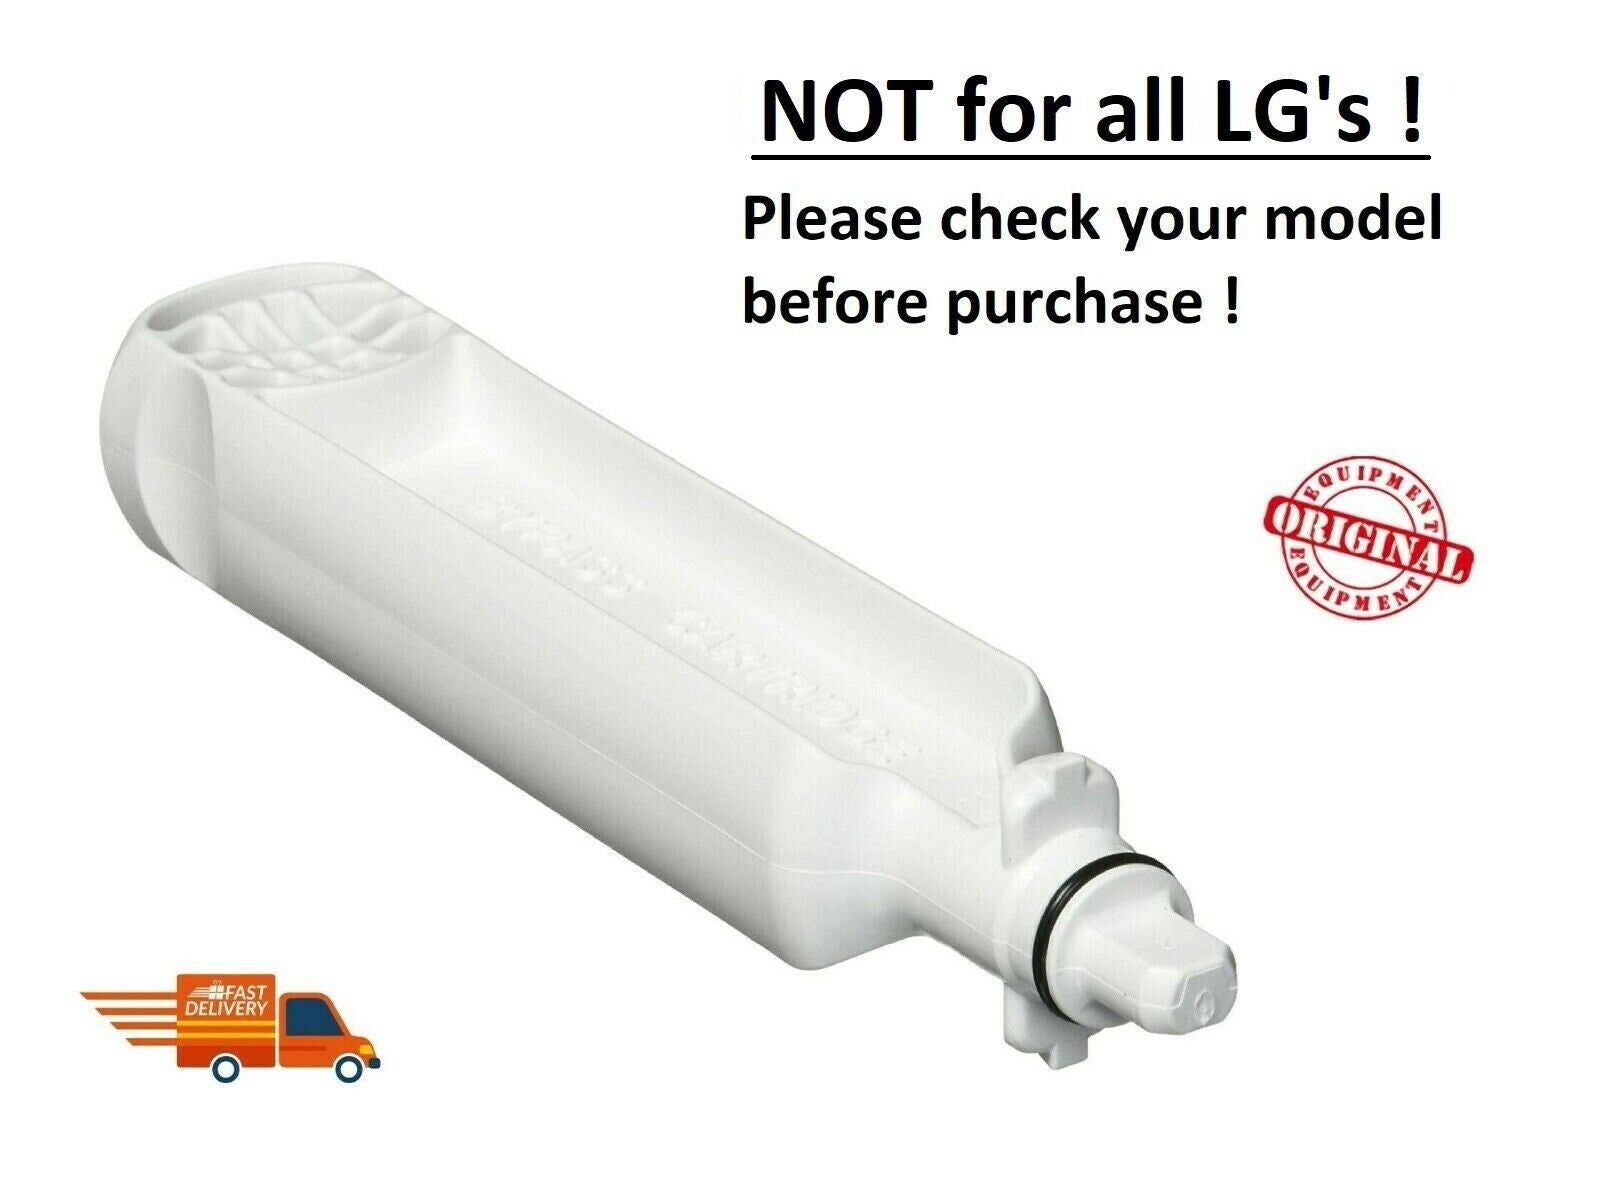 New OEM Genuine LG ABN73019101 Refrigerator Filter Bypass Plug PLEASE READ ALL